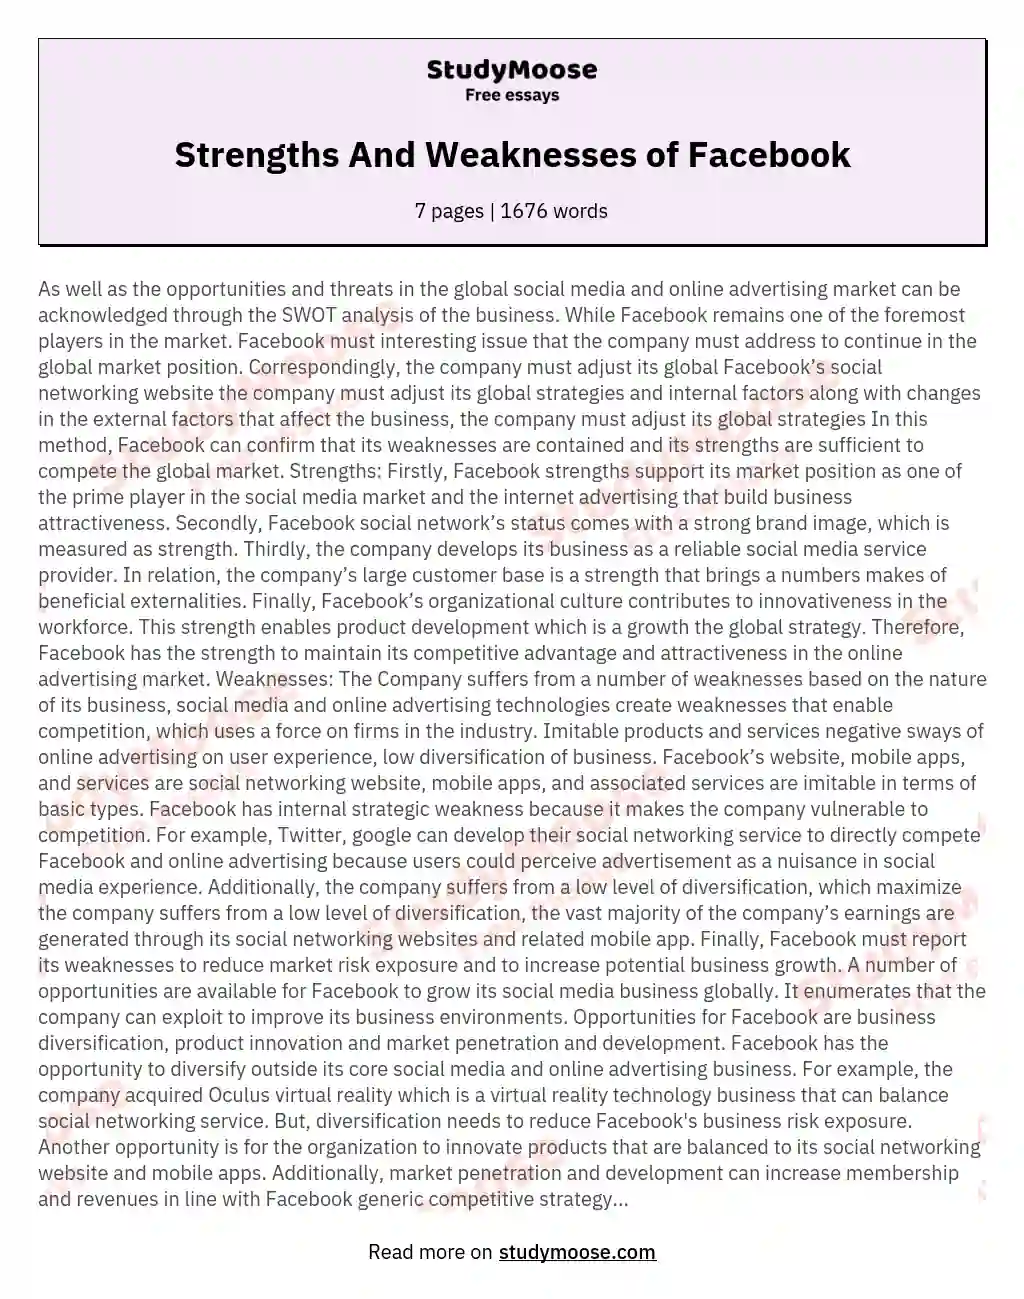 Strengths And Weaknesses of Facebook essay